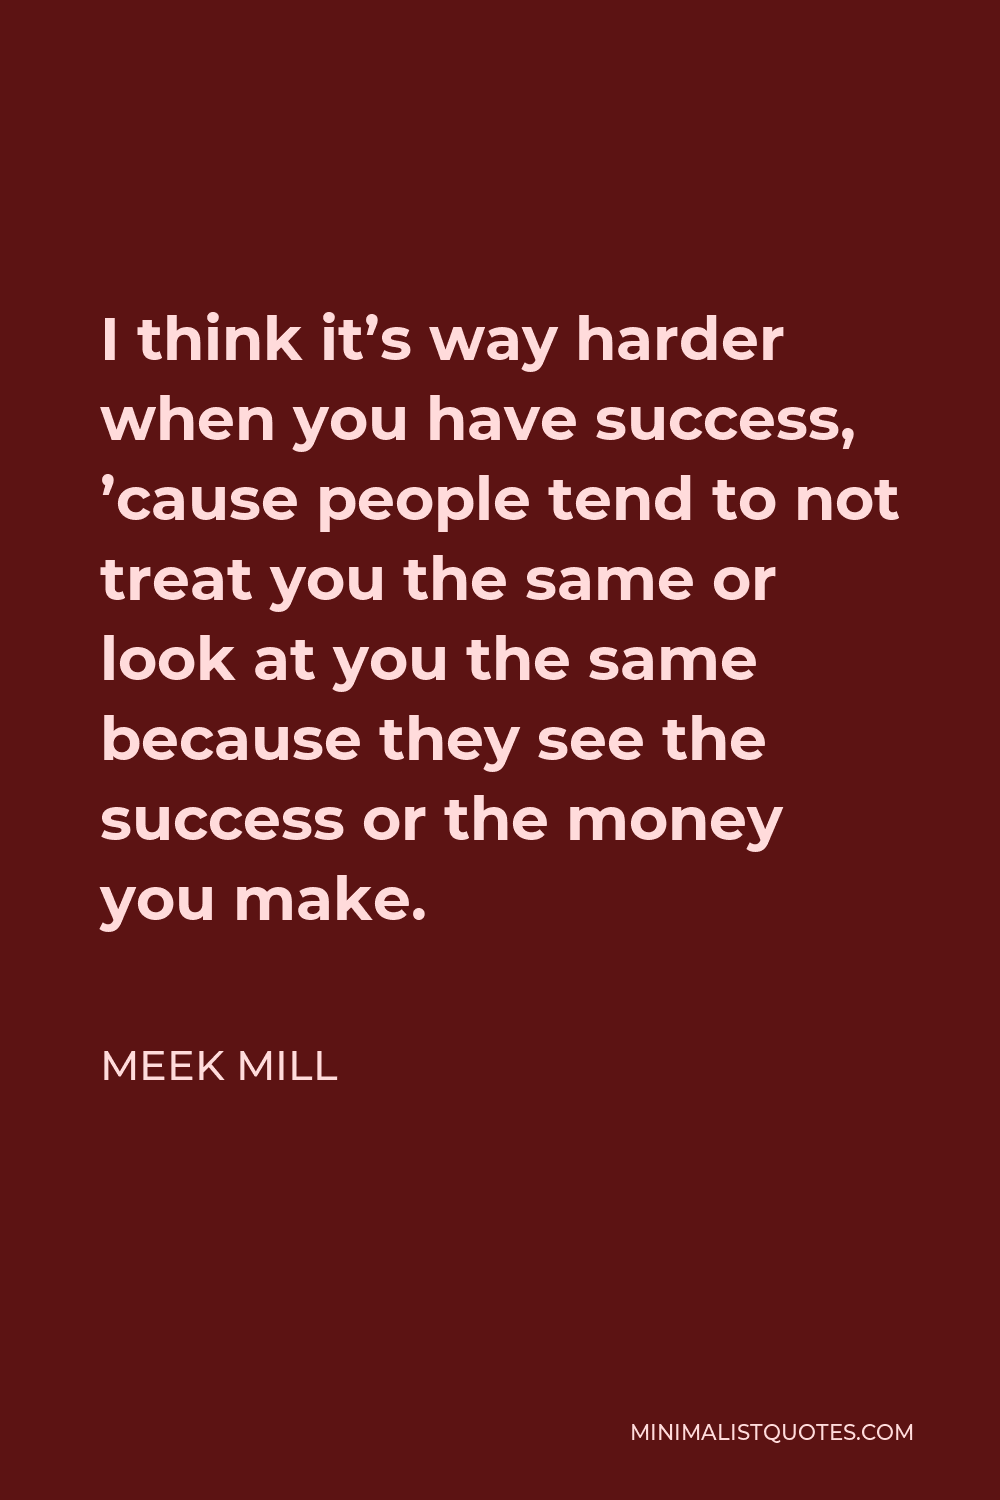 Meek Mill Quote - I think it’s way harder when you have success, ’cause people tend to not treat you the same or look at you the same because they see the success or the money you make.